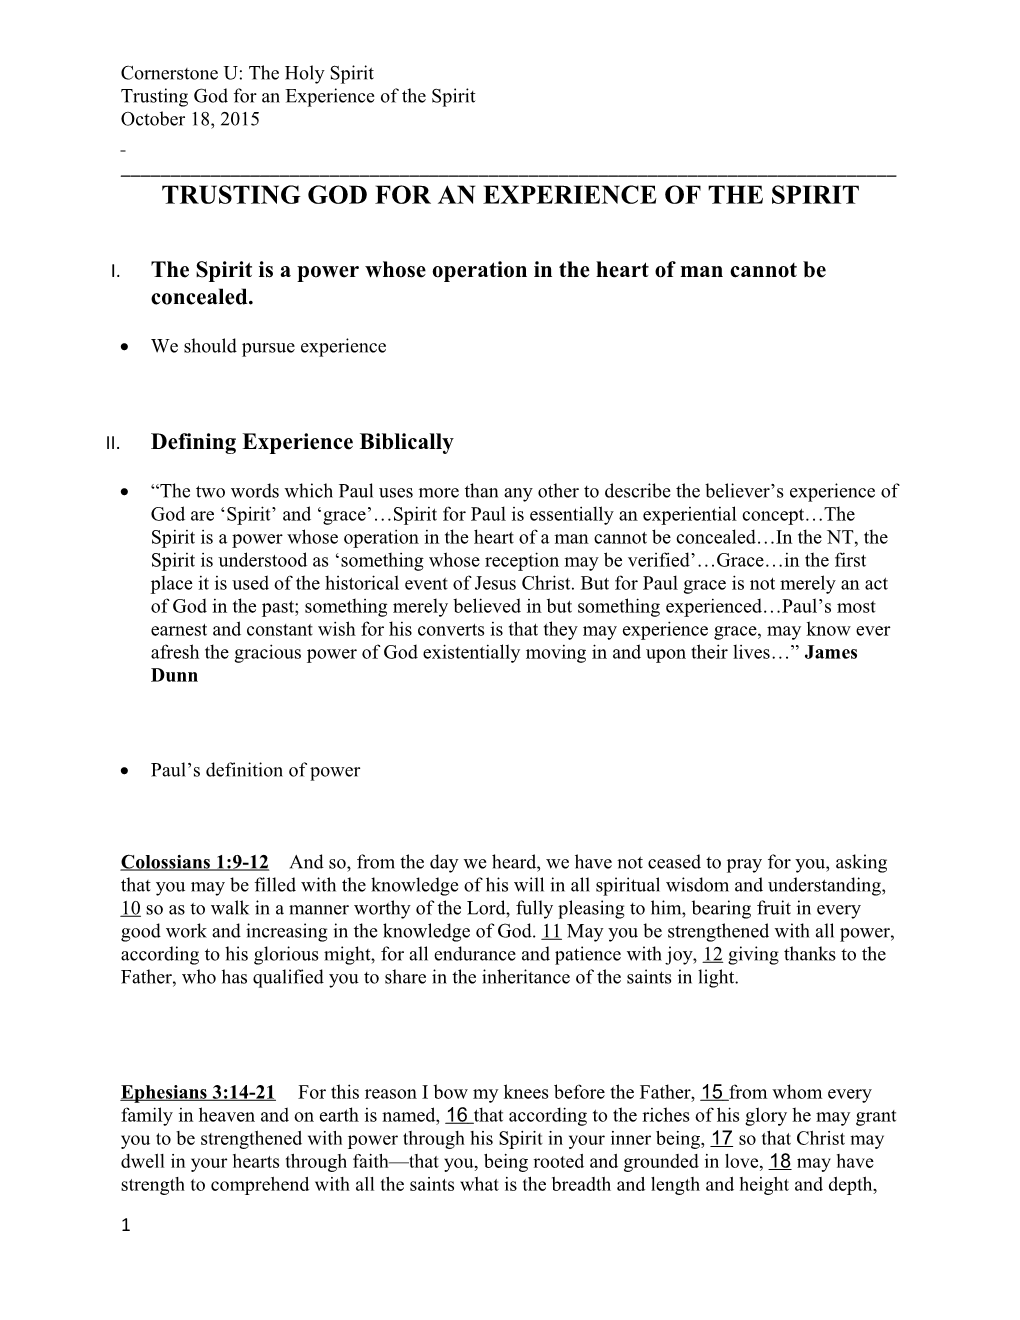 Trusting God for an Experience of the Spirit